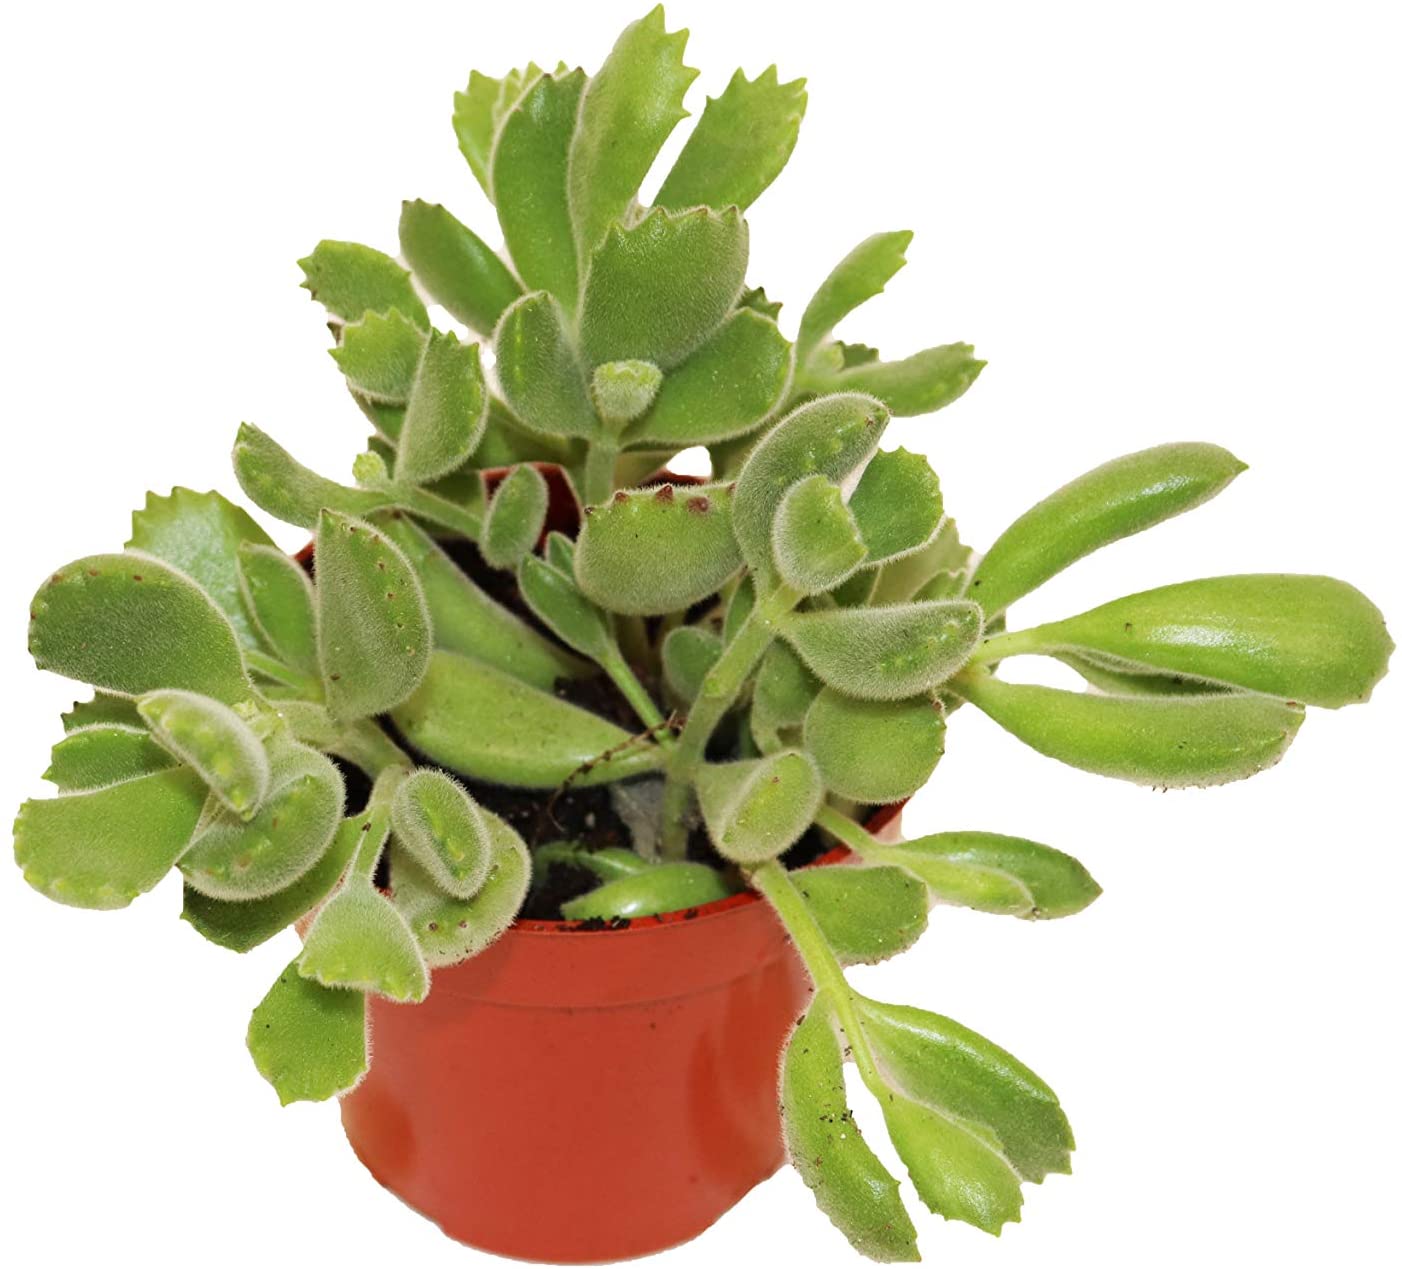 A green succulent with fuzzy plump leaves with serrated tips. It is growing from an orange planter.